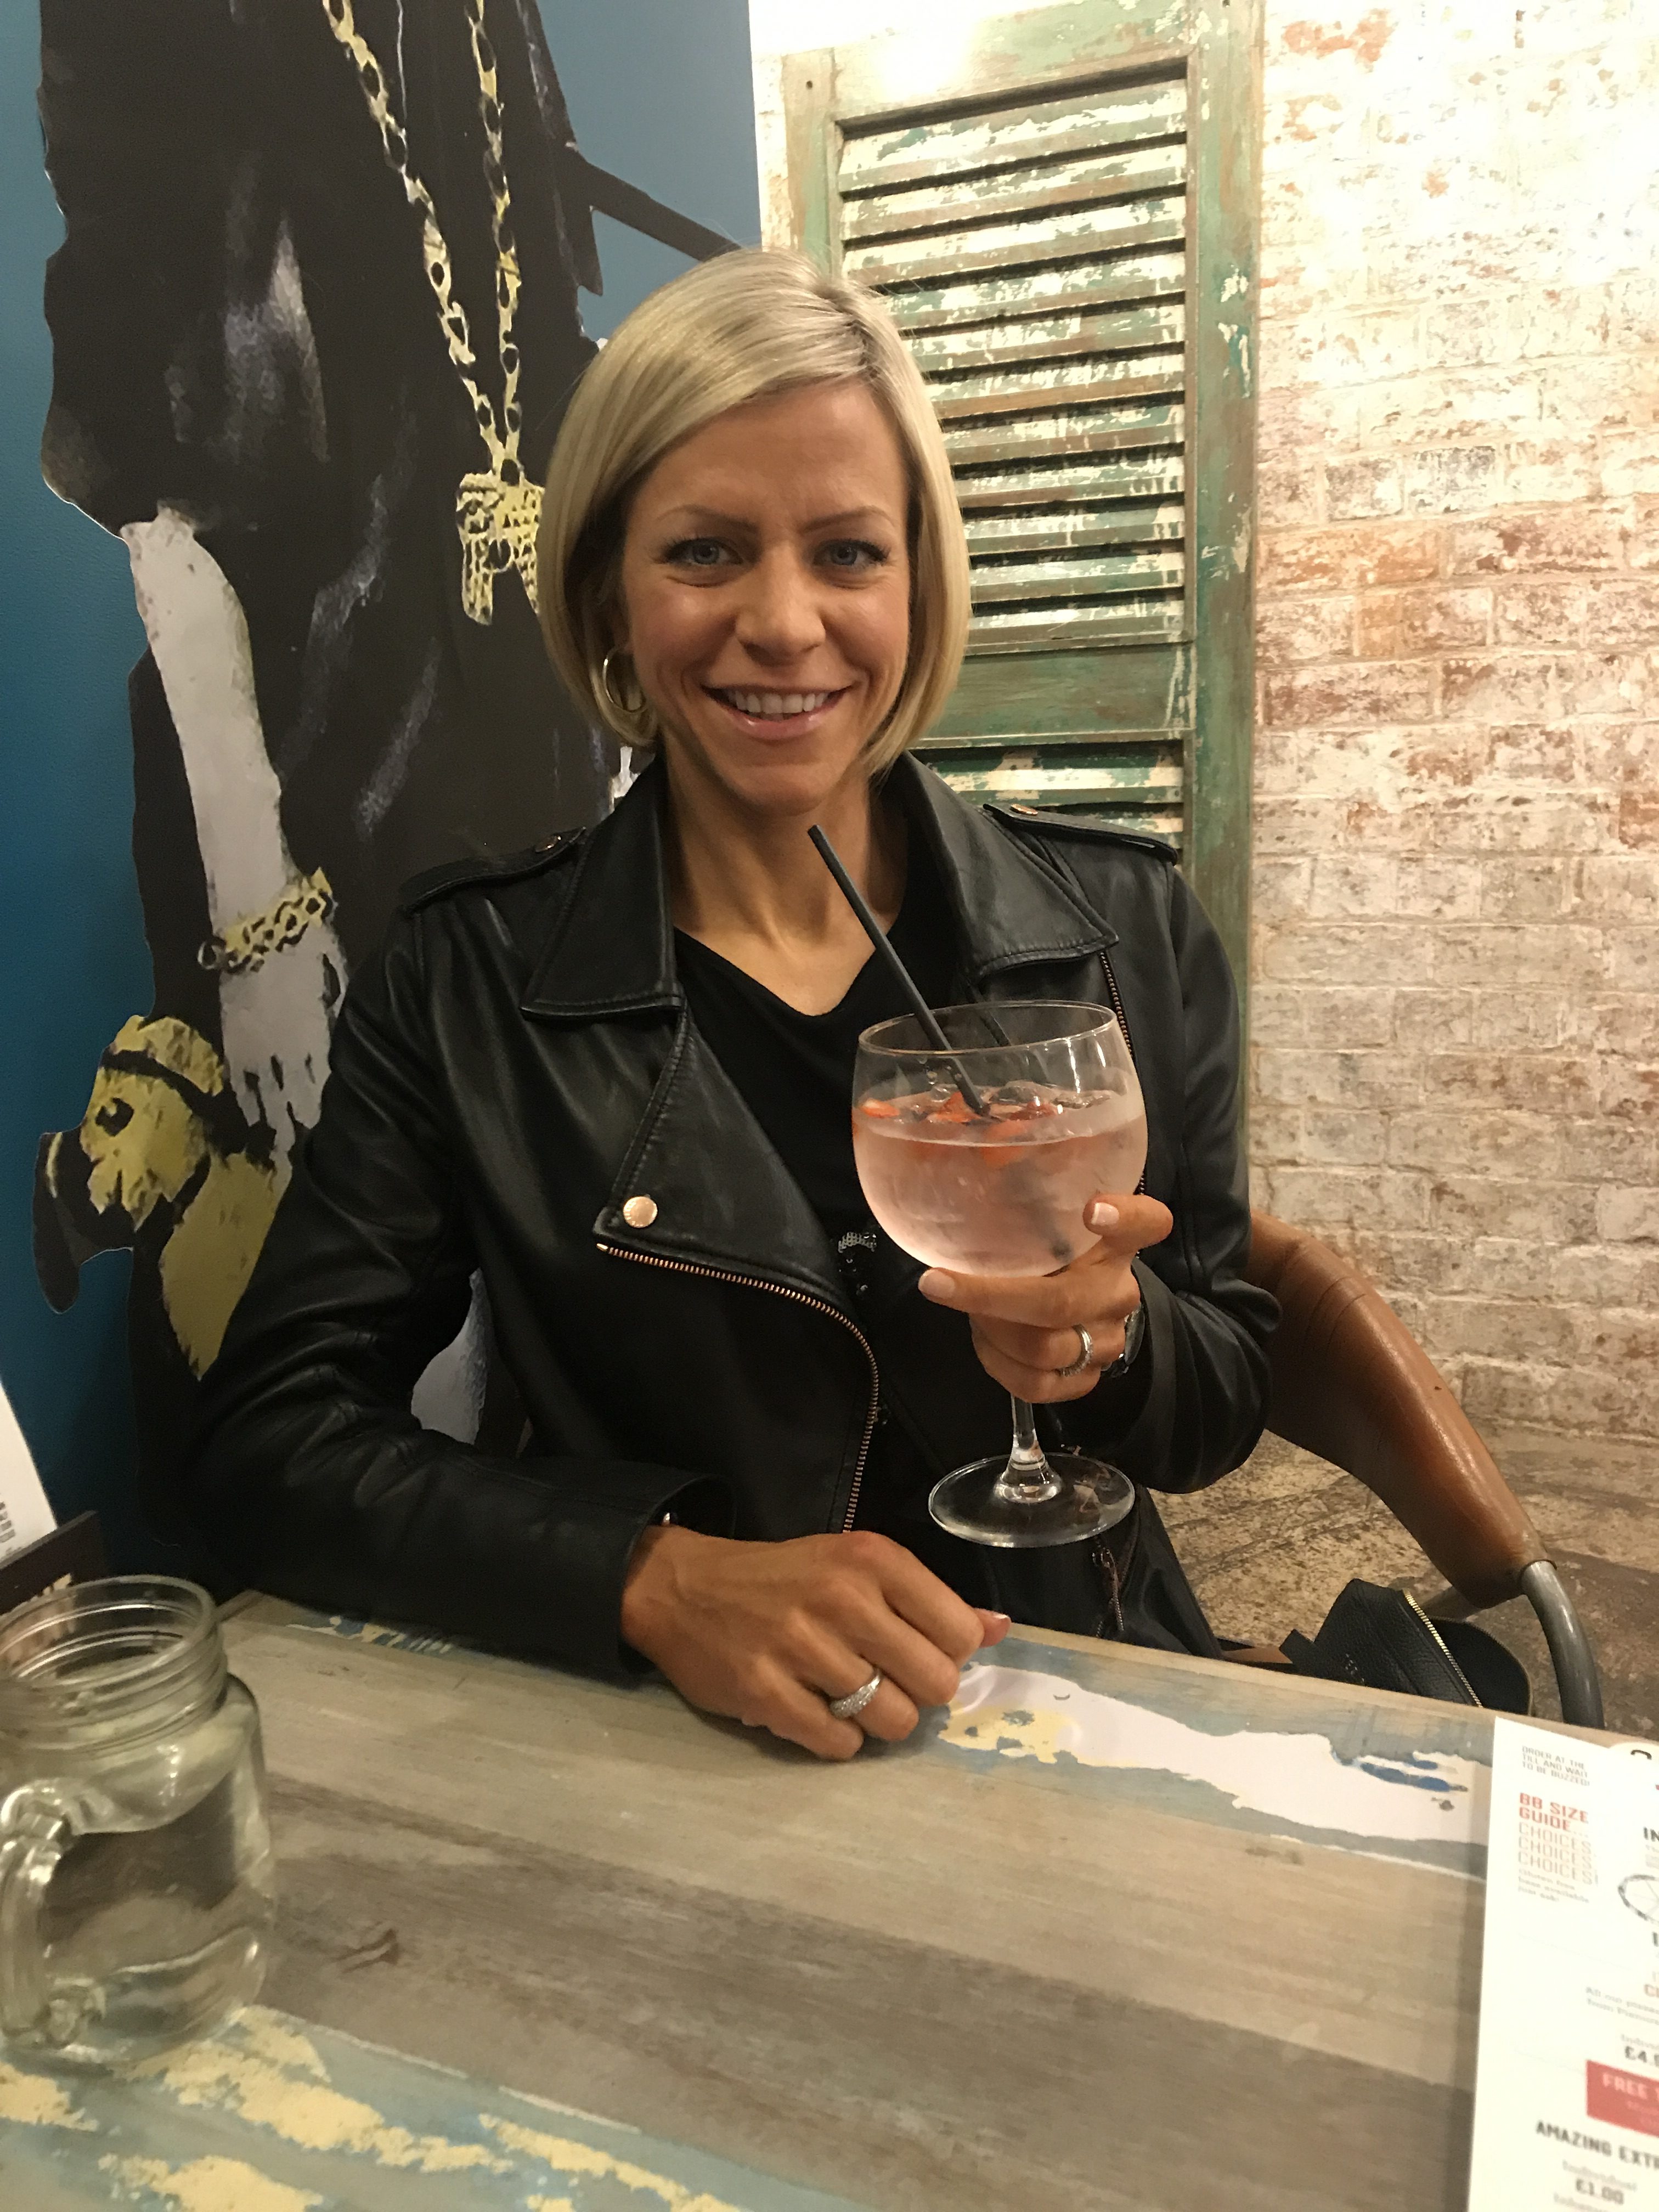 Attractive woman wearing a leather biker jacket relaxes with a drink